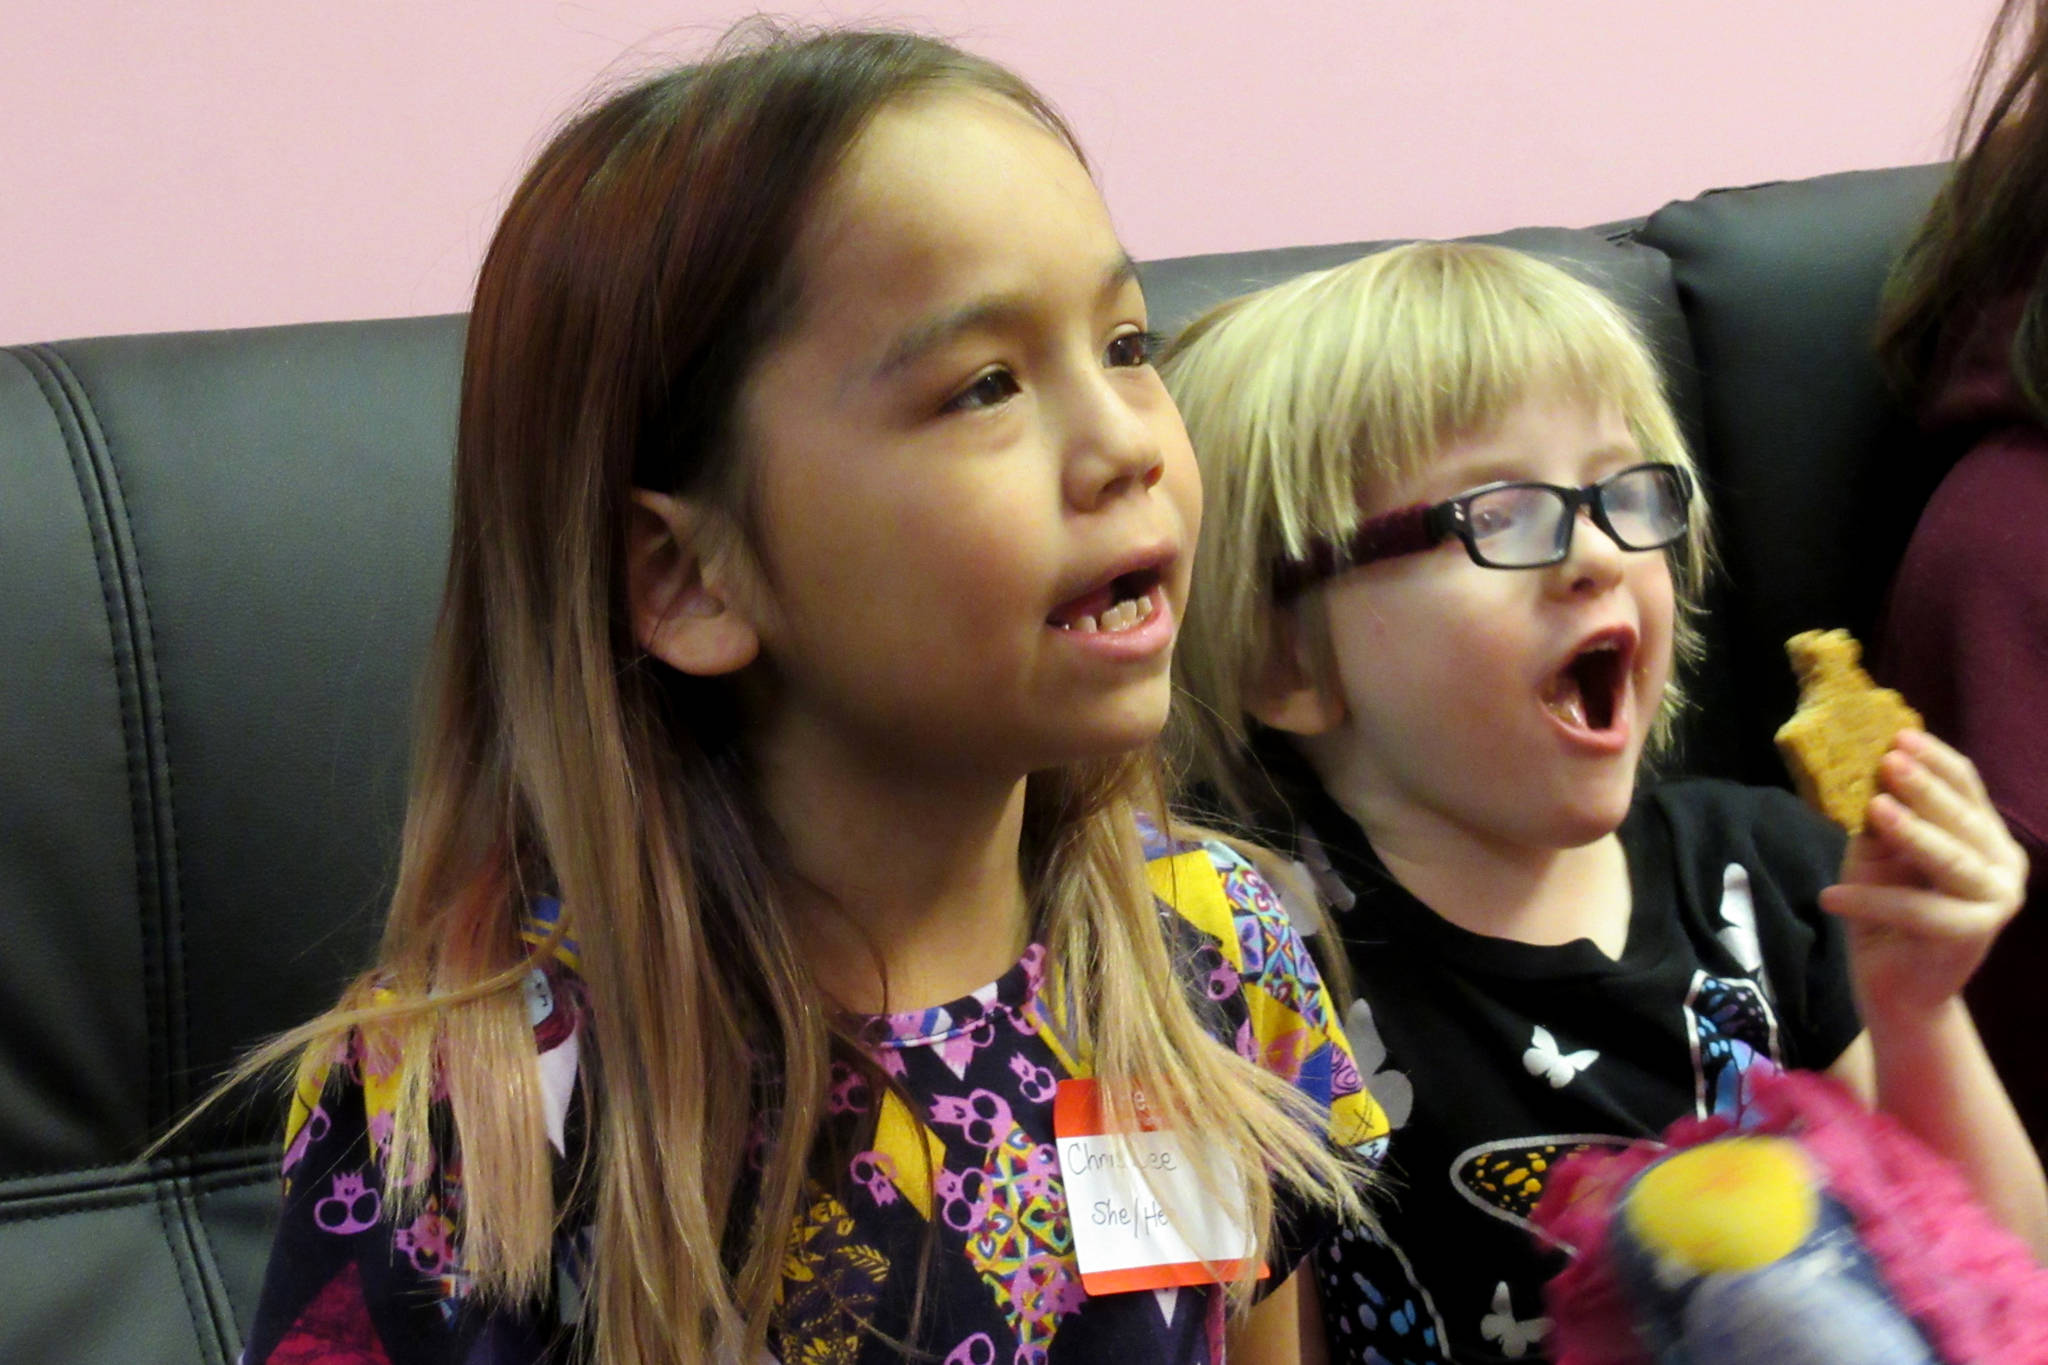 ChrisDee Scharen, 7, and Linden Harris, 4, react while playing video games at Game On’s first Trans Gaming Night, Saturday, Feb. 23, 2019. (Ben Hohenstatt | Capital City Weekly)